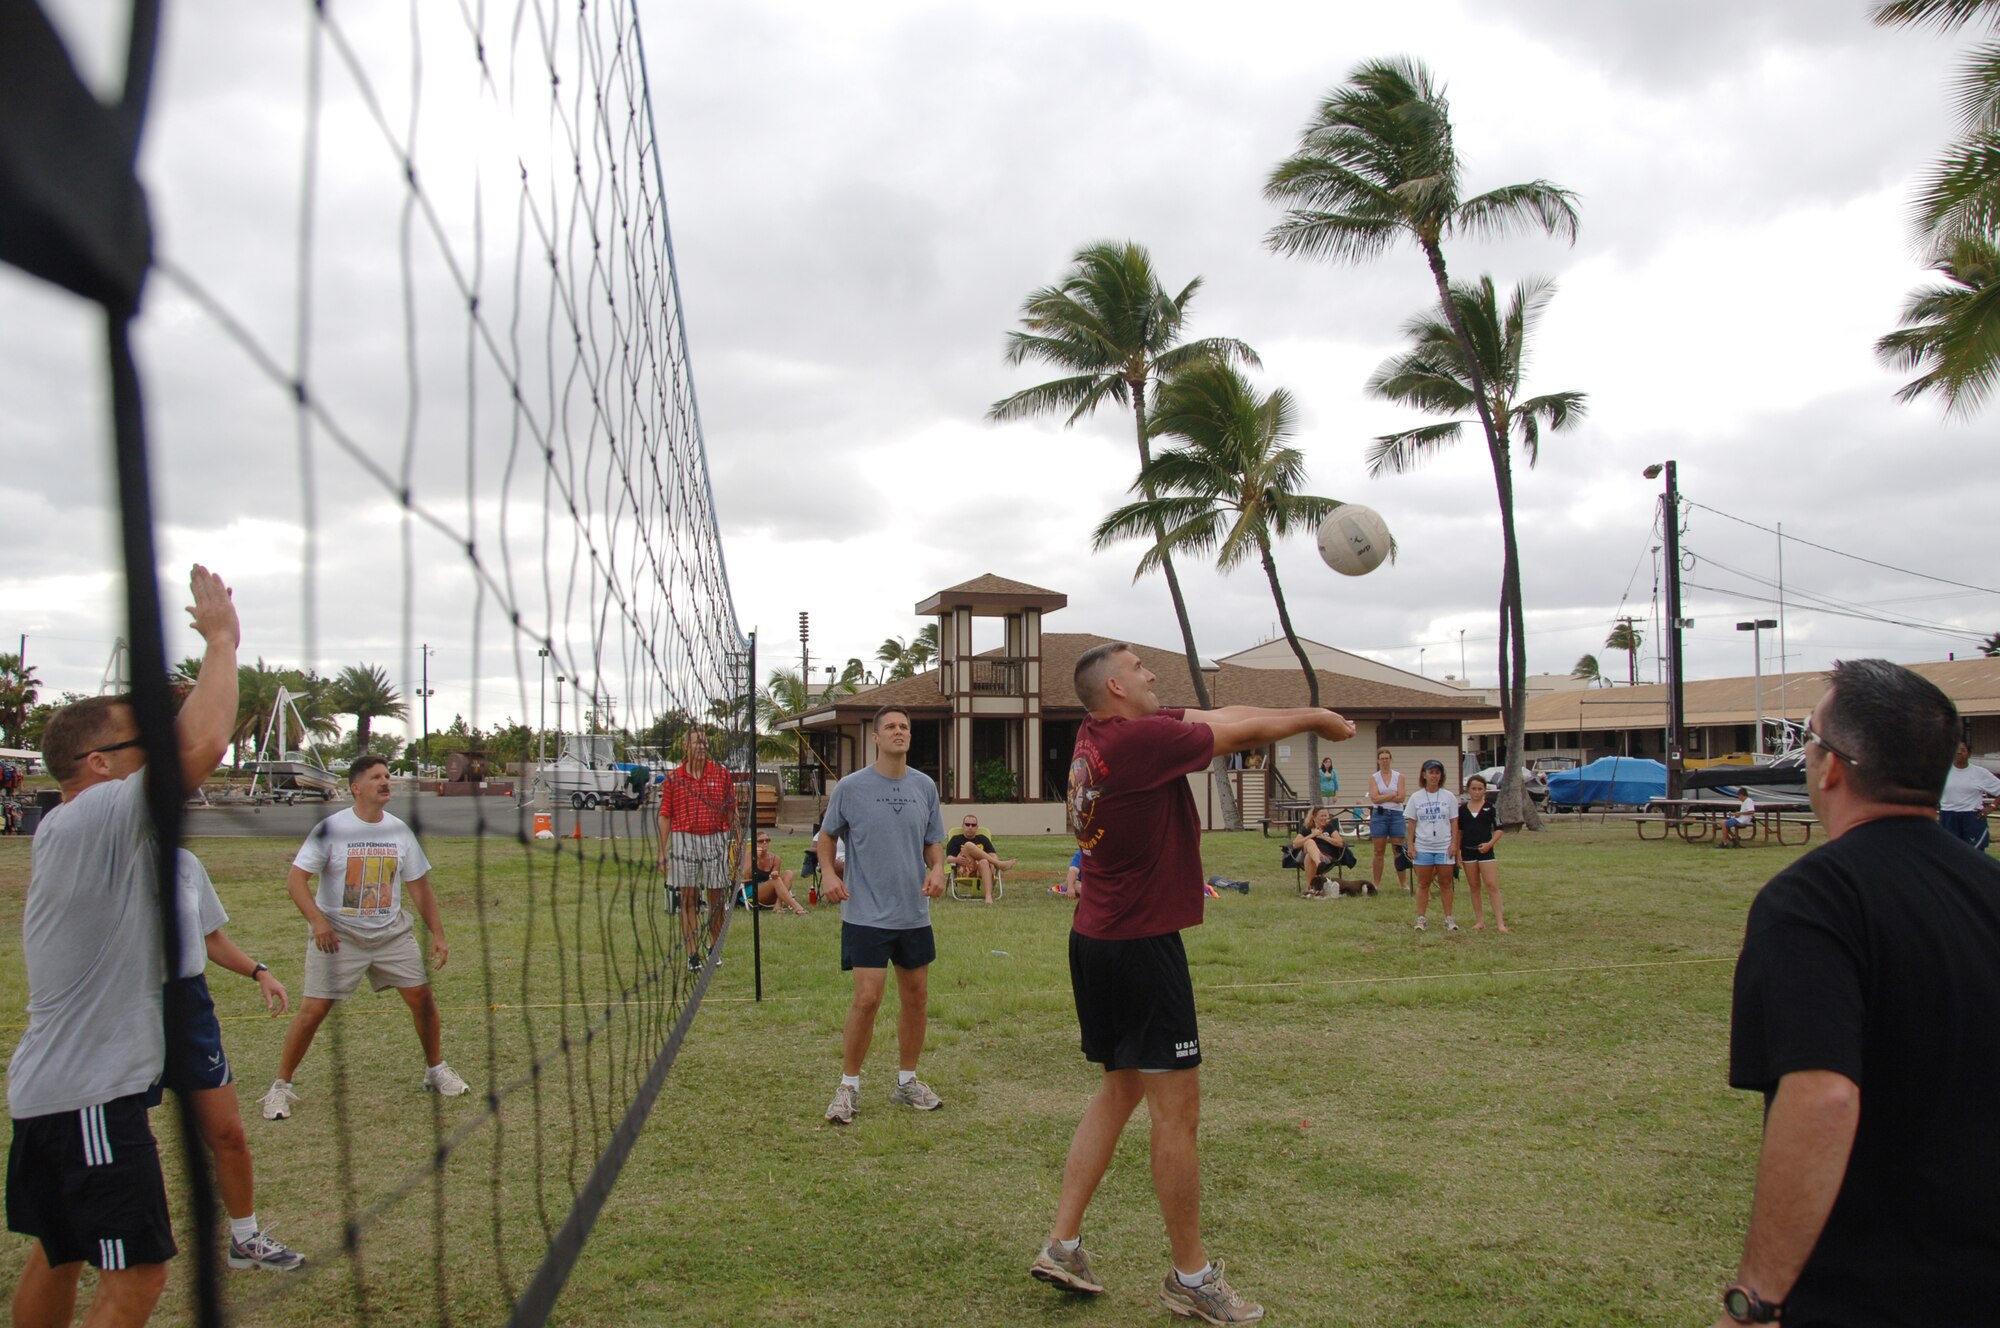 Chief Master Sgt. Ron Gisel, PACAF A6/A6XX, hits the ball in the air during the annual "Chiefs vs. Eagles" volleyball game during Team HIckam Sports Day April 16. The Chiefs defeated the Eagles two games to zero. (U.S. Air Force photo by Senior Airman Nathan Allen)